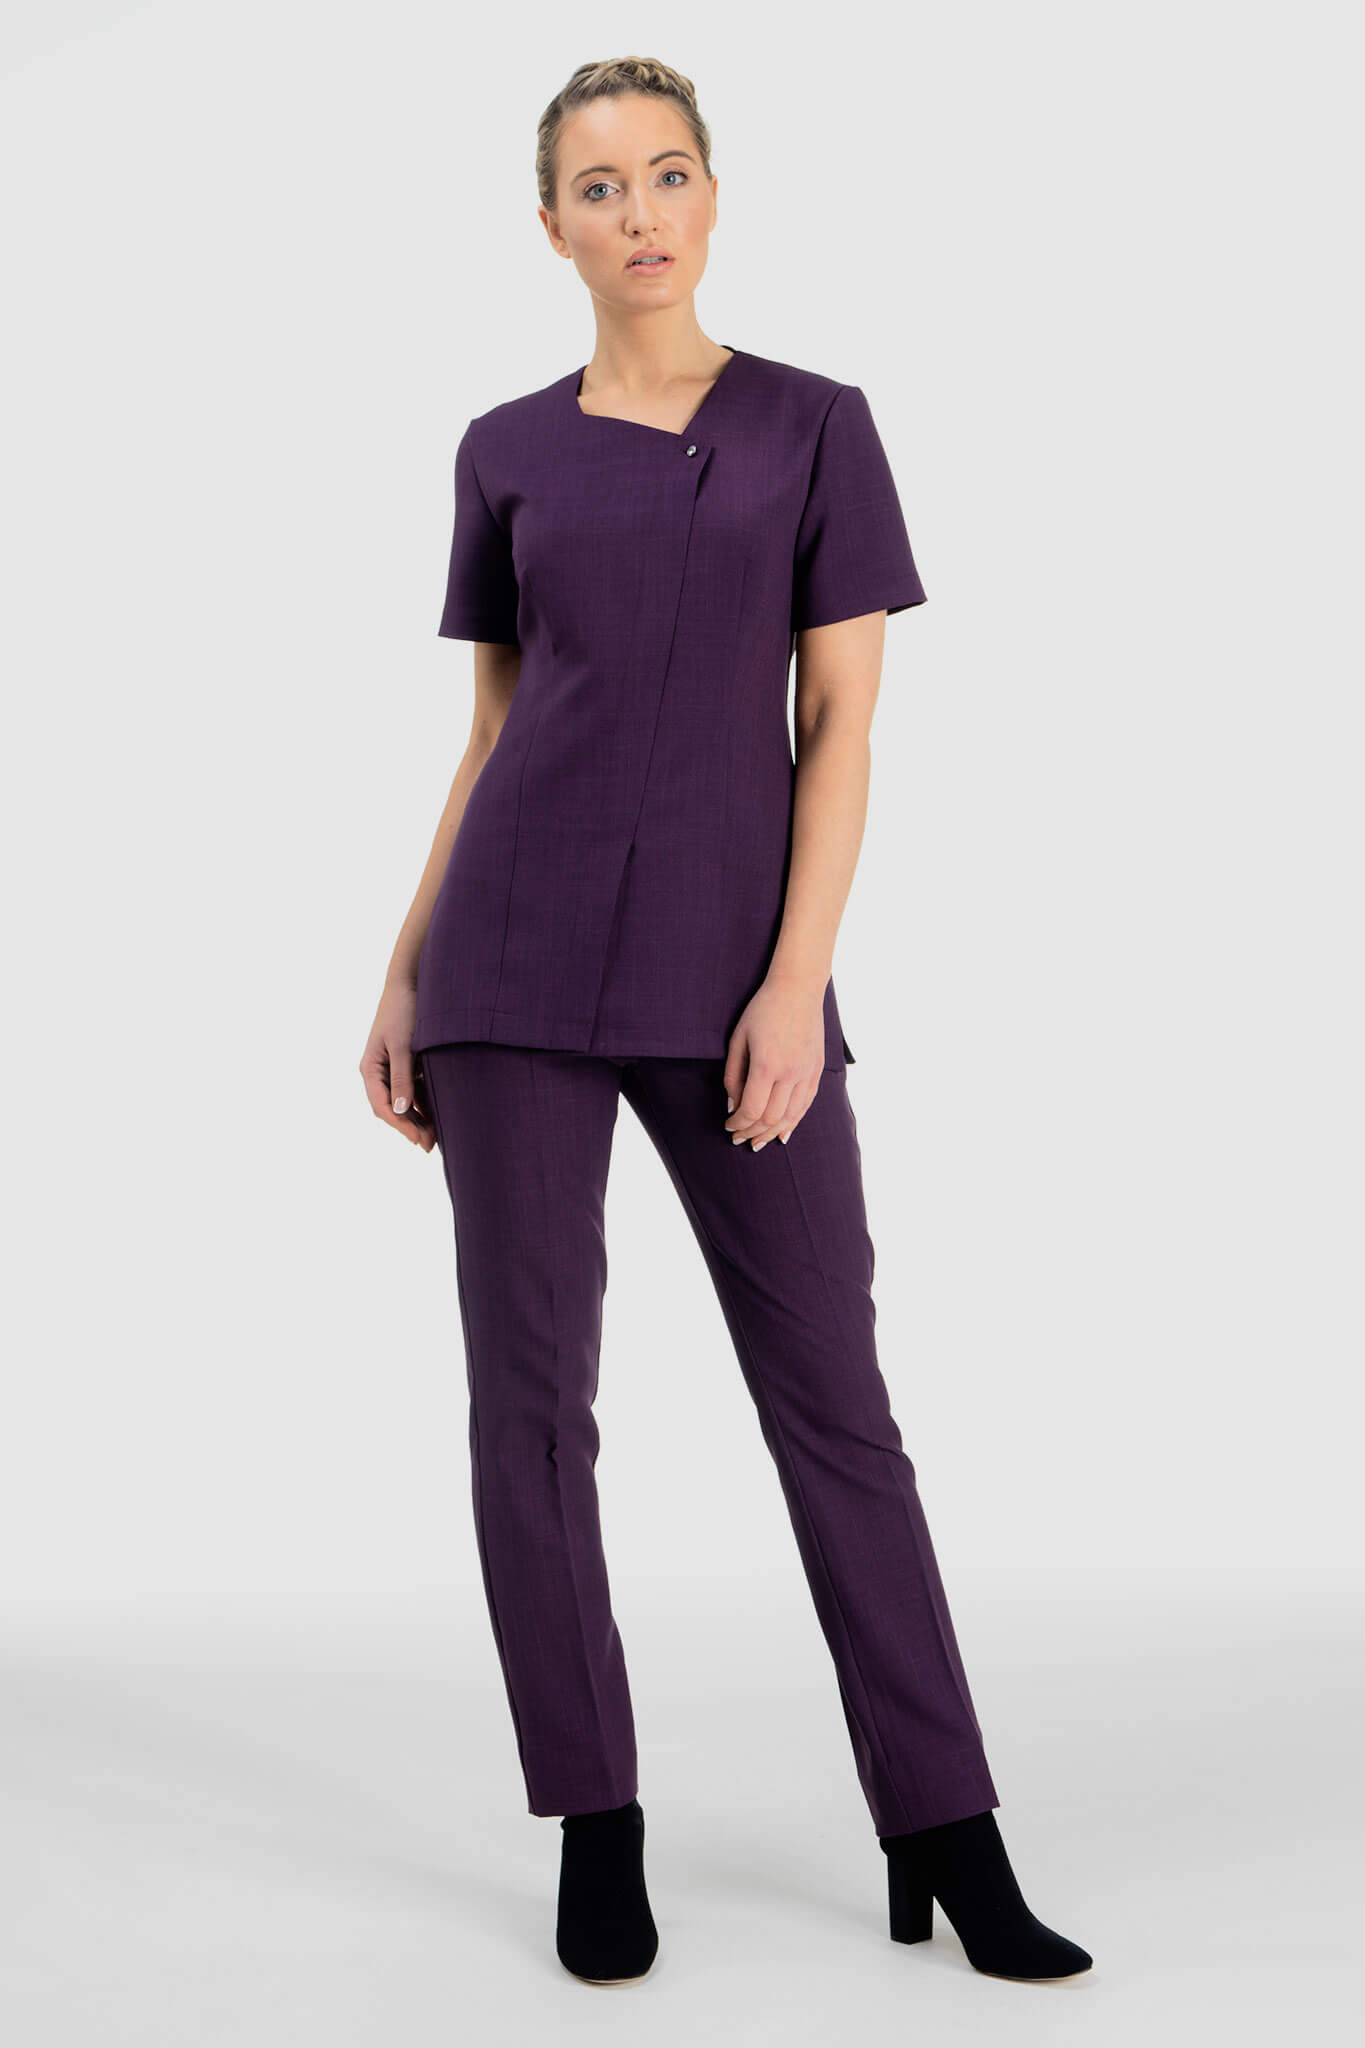 New Como Tunic | Luxury Uniforms - Florence Roby